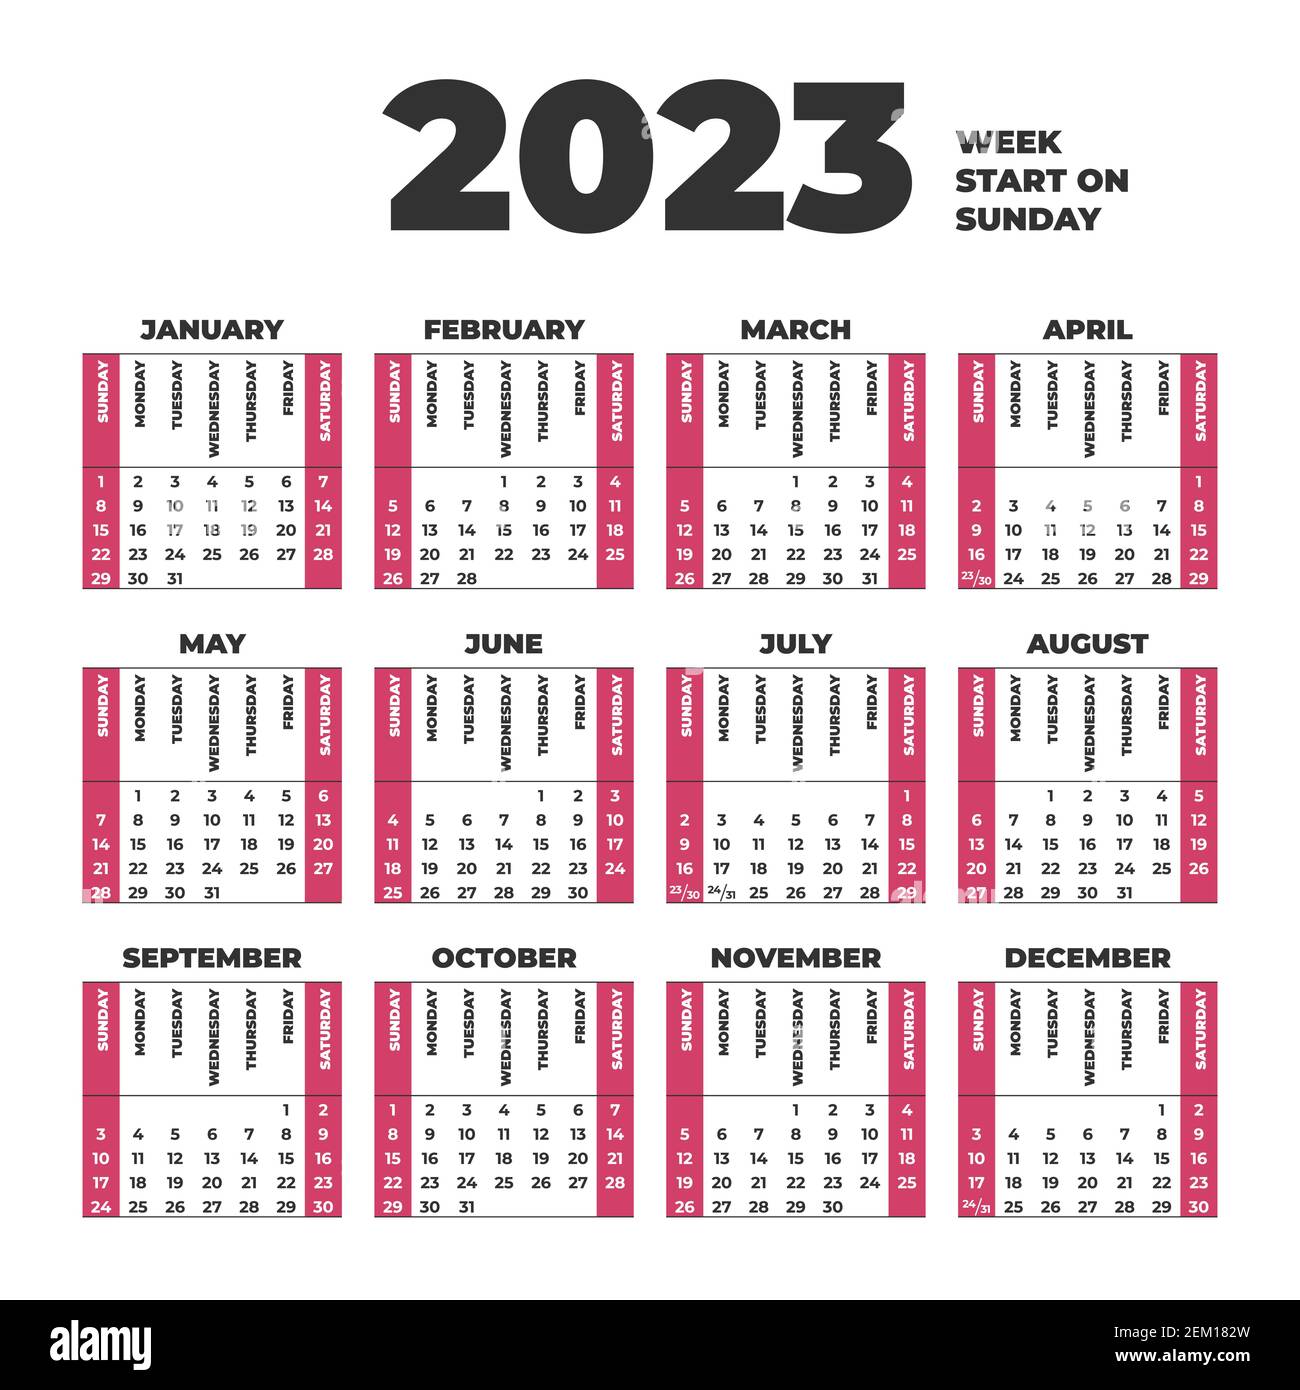 2023 Calendar template with weeks start on Sunday Stock Vector Image